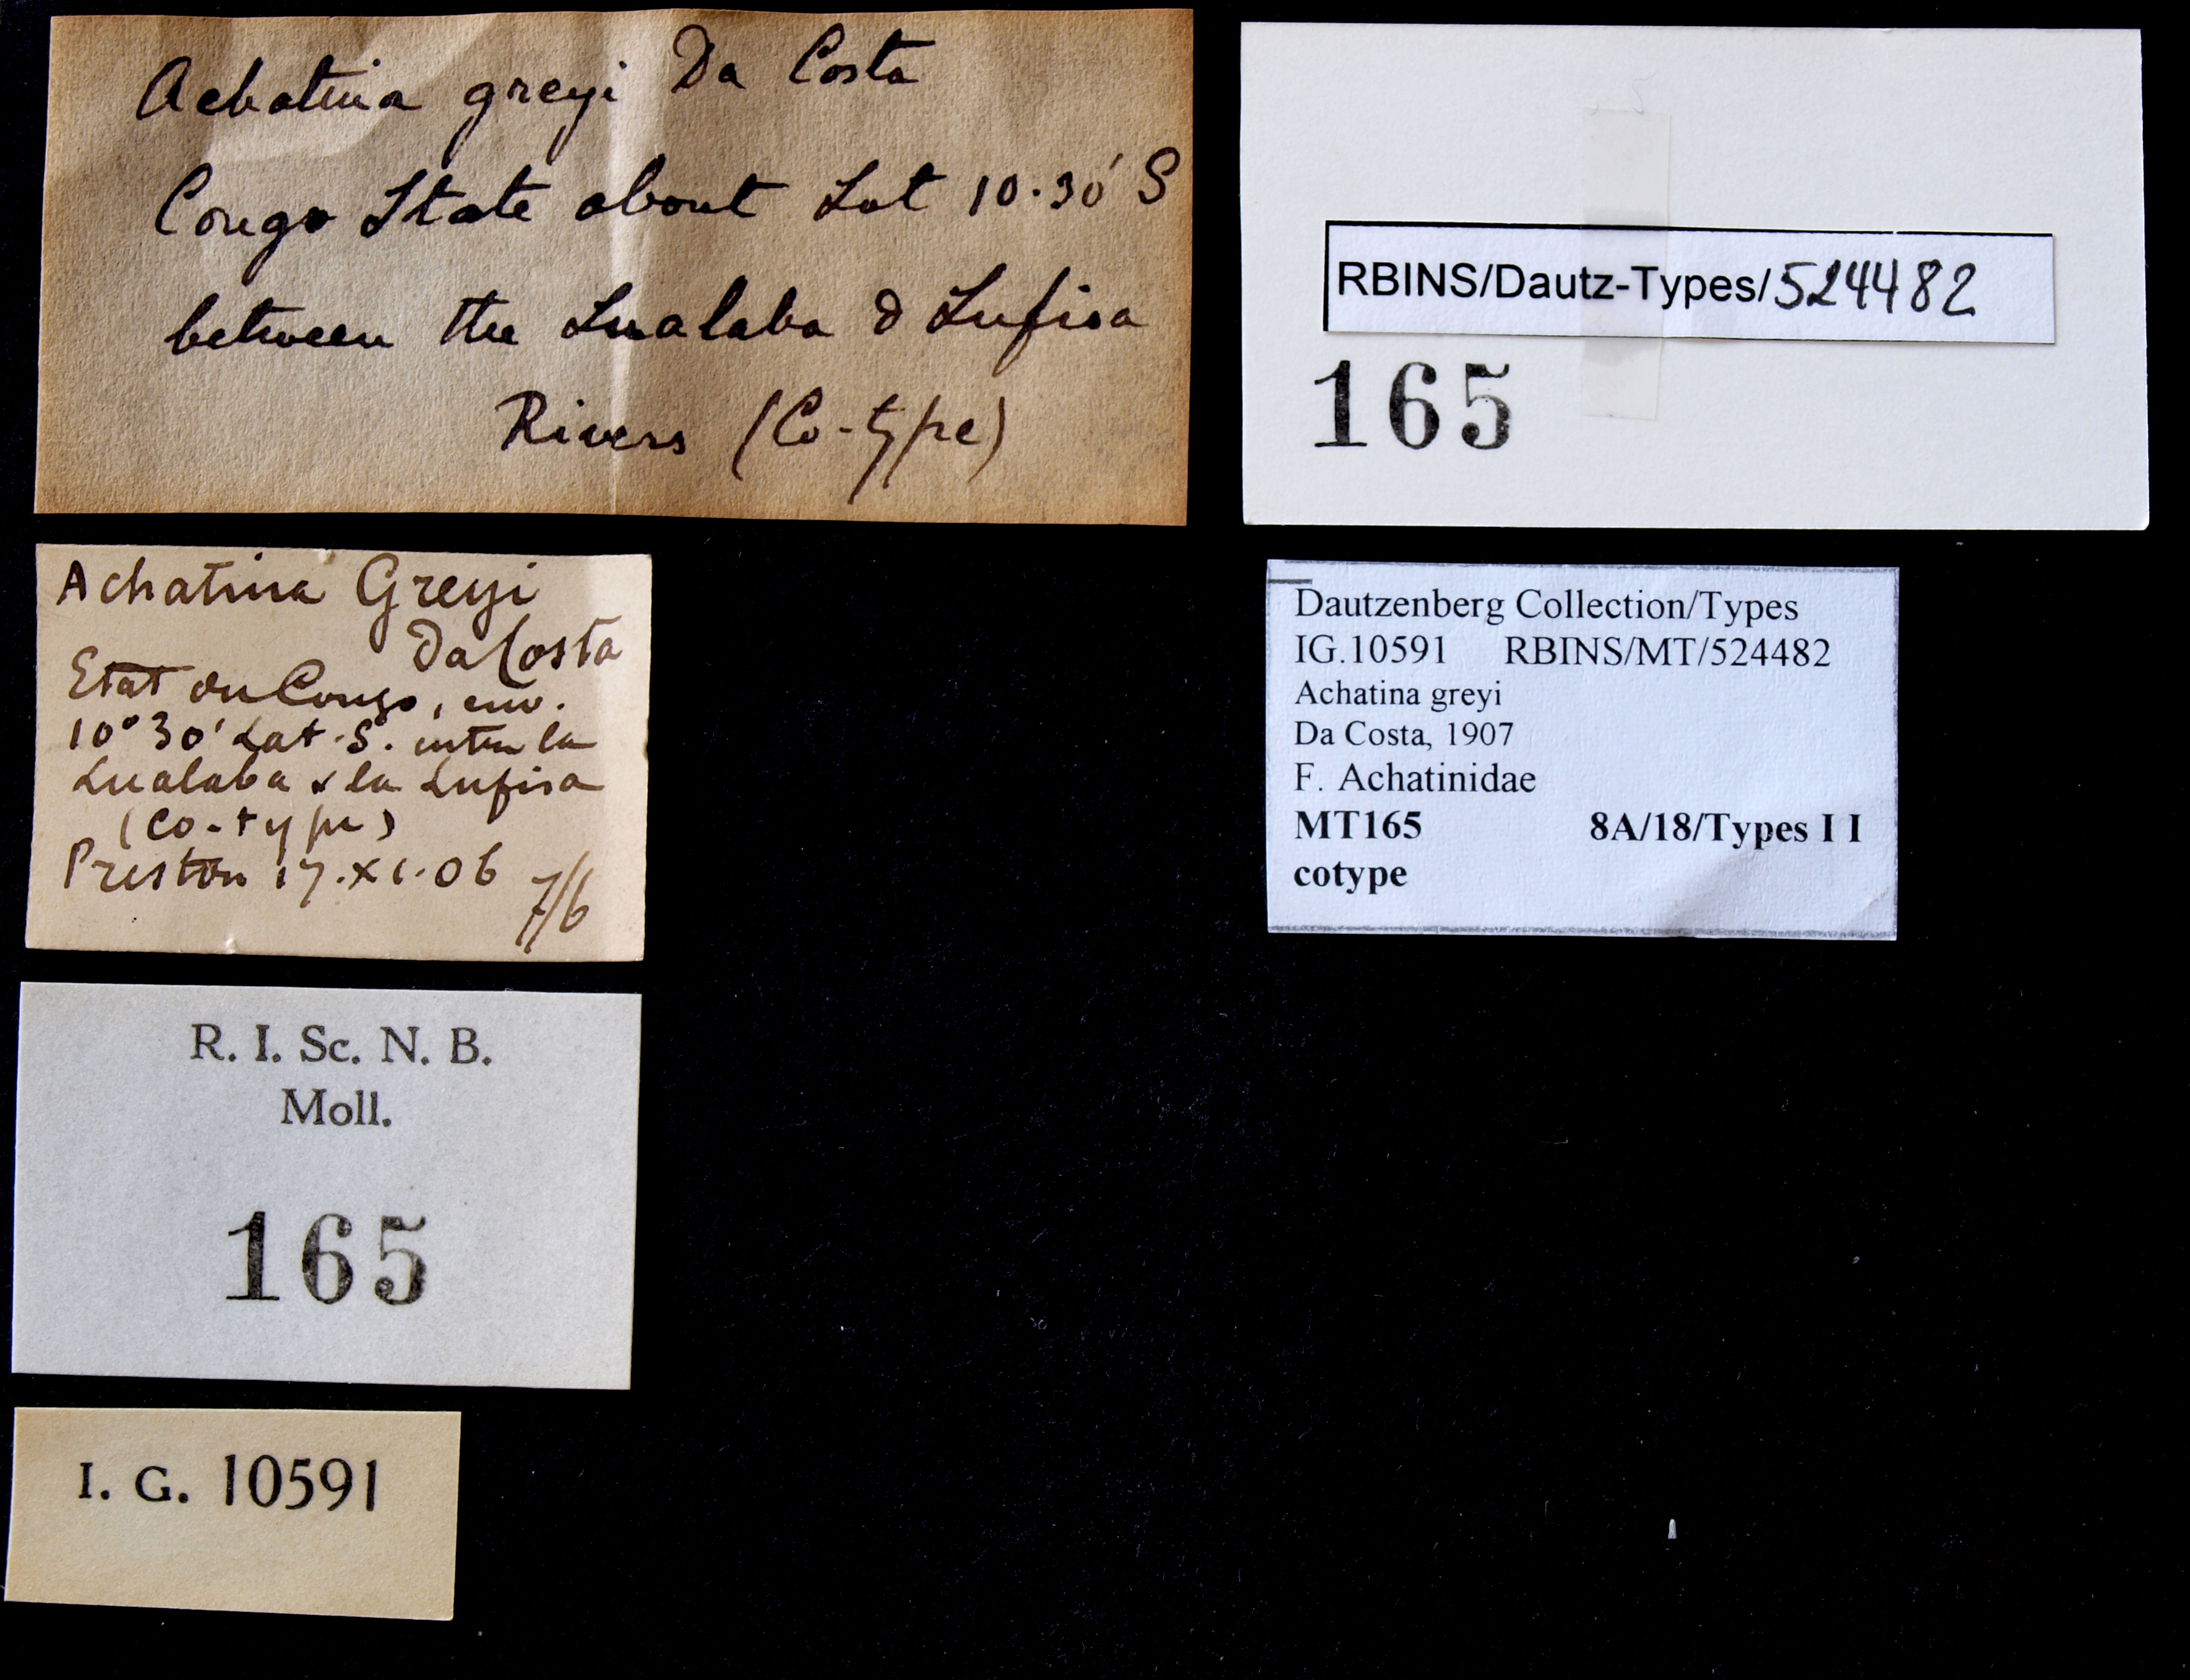 BE-RBINS-INV COTYPE MT 165 Achatina greyi LABELS.jpg